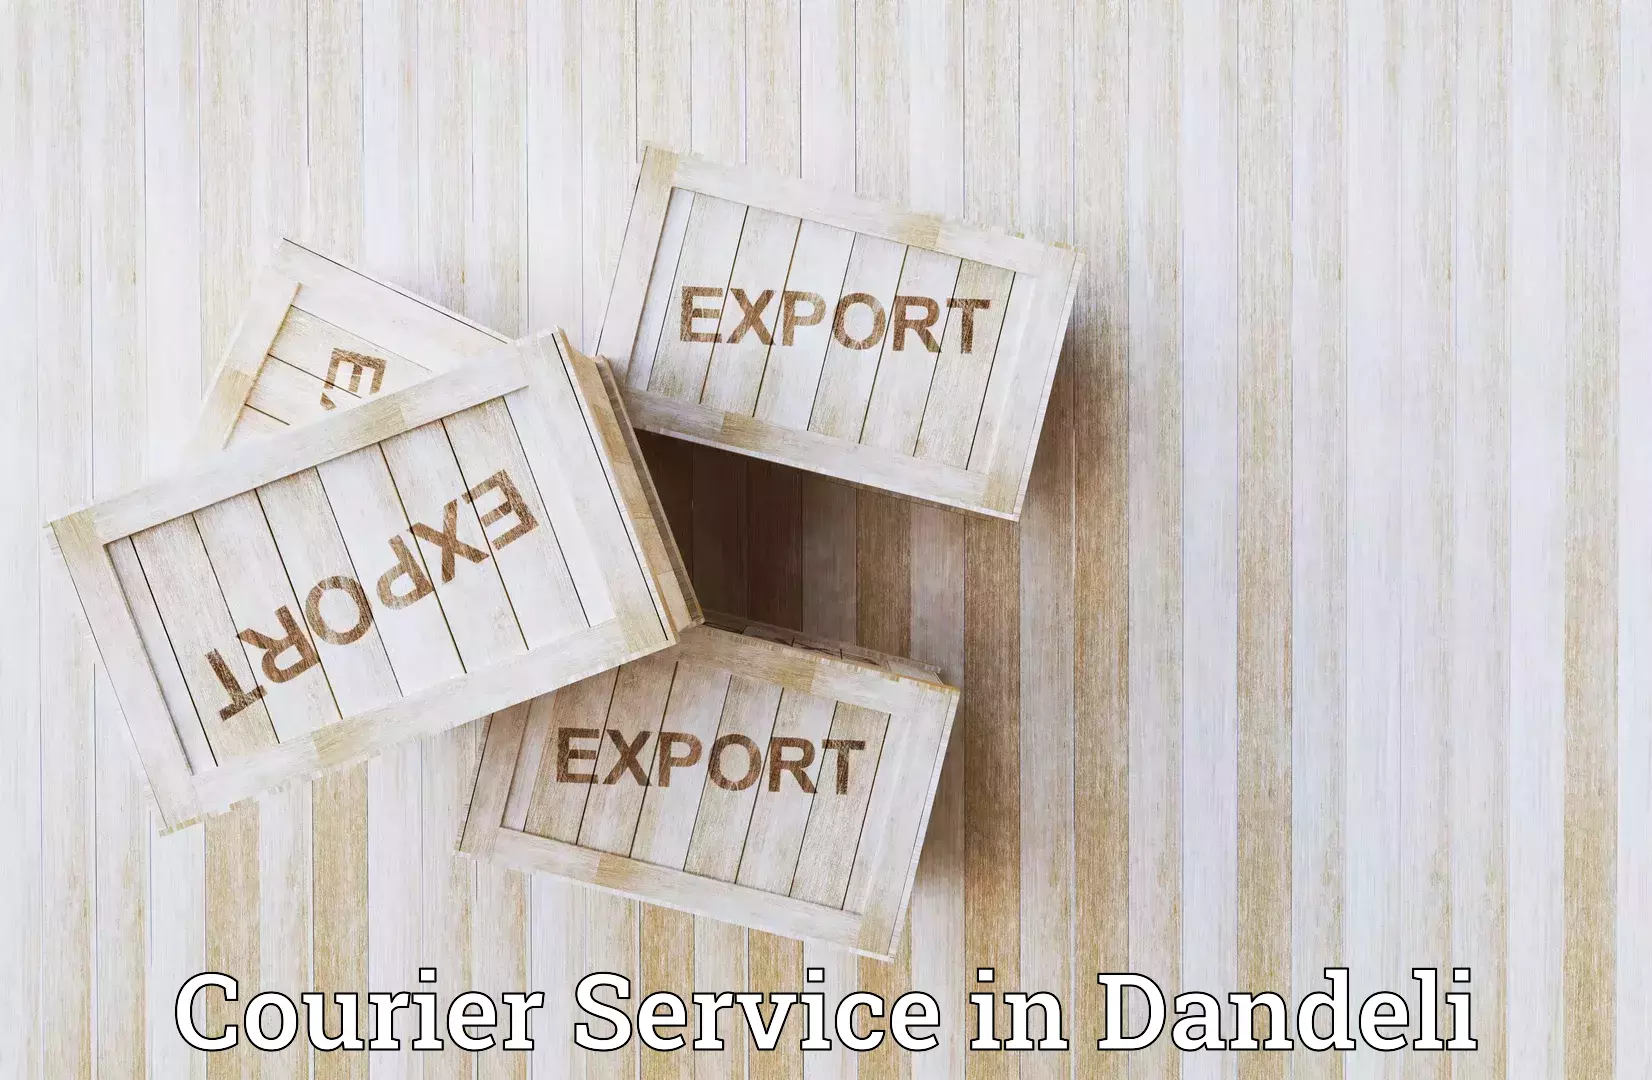 Tailored delivery services in Dandeli